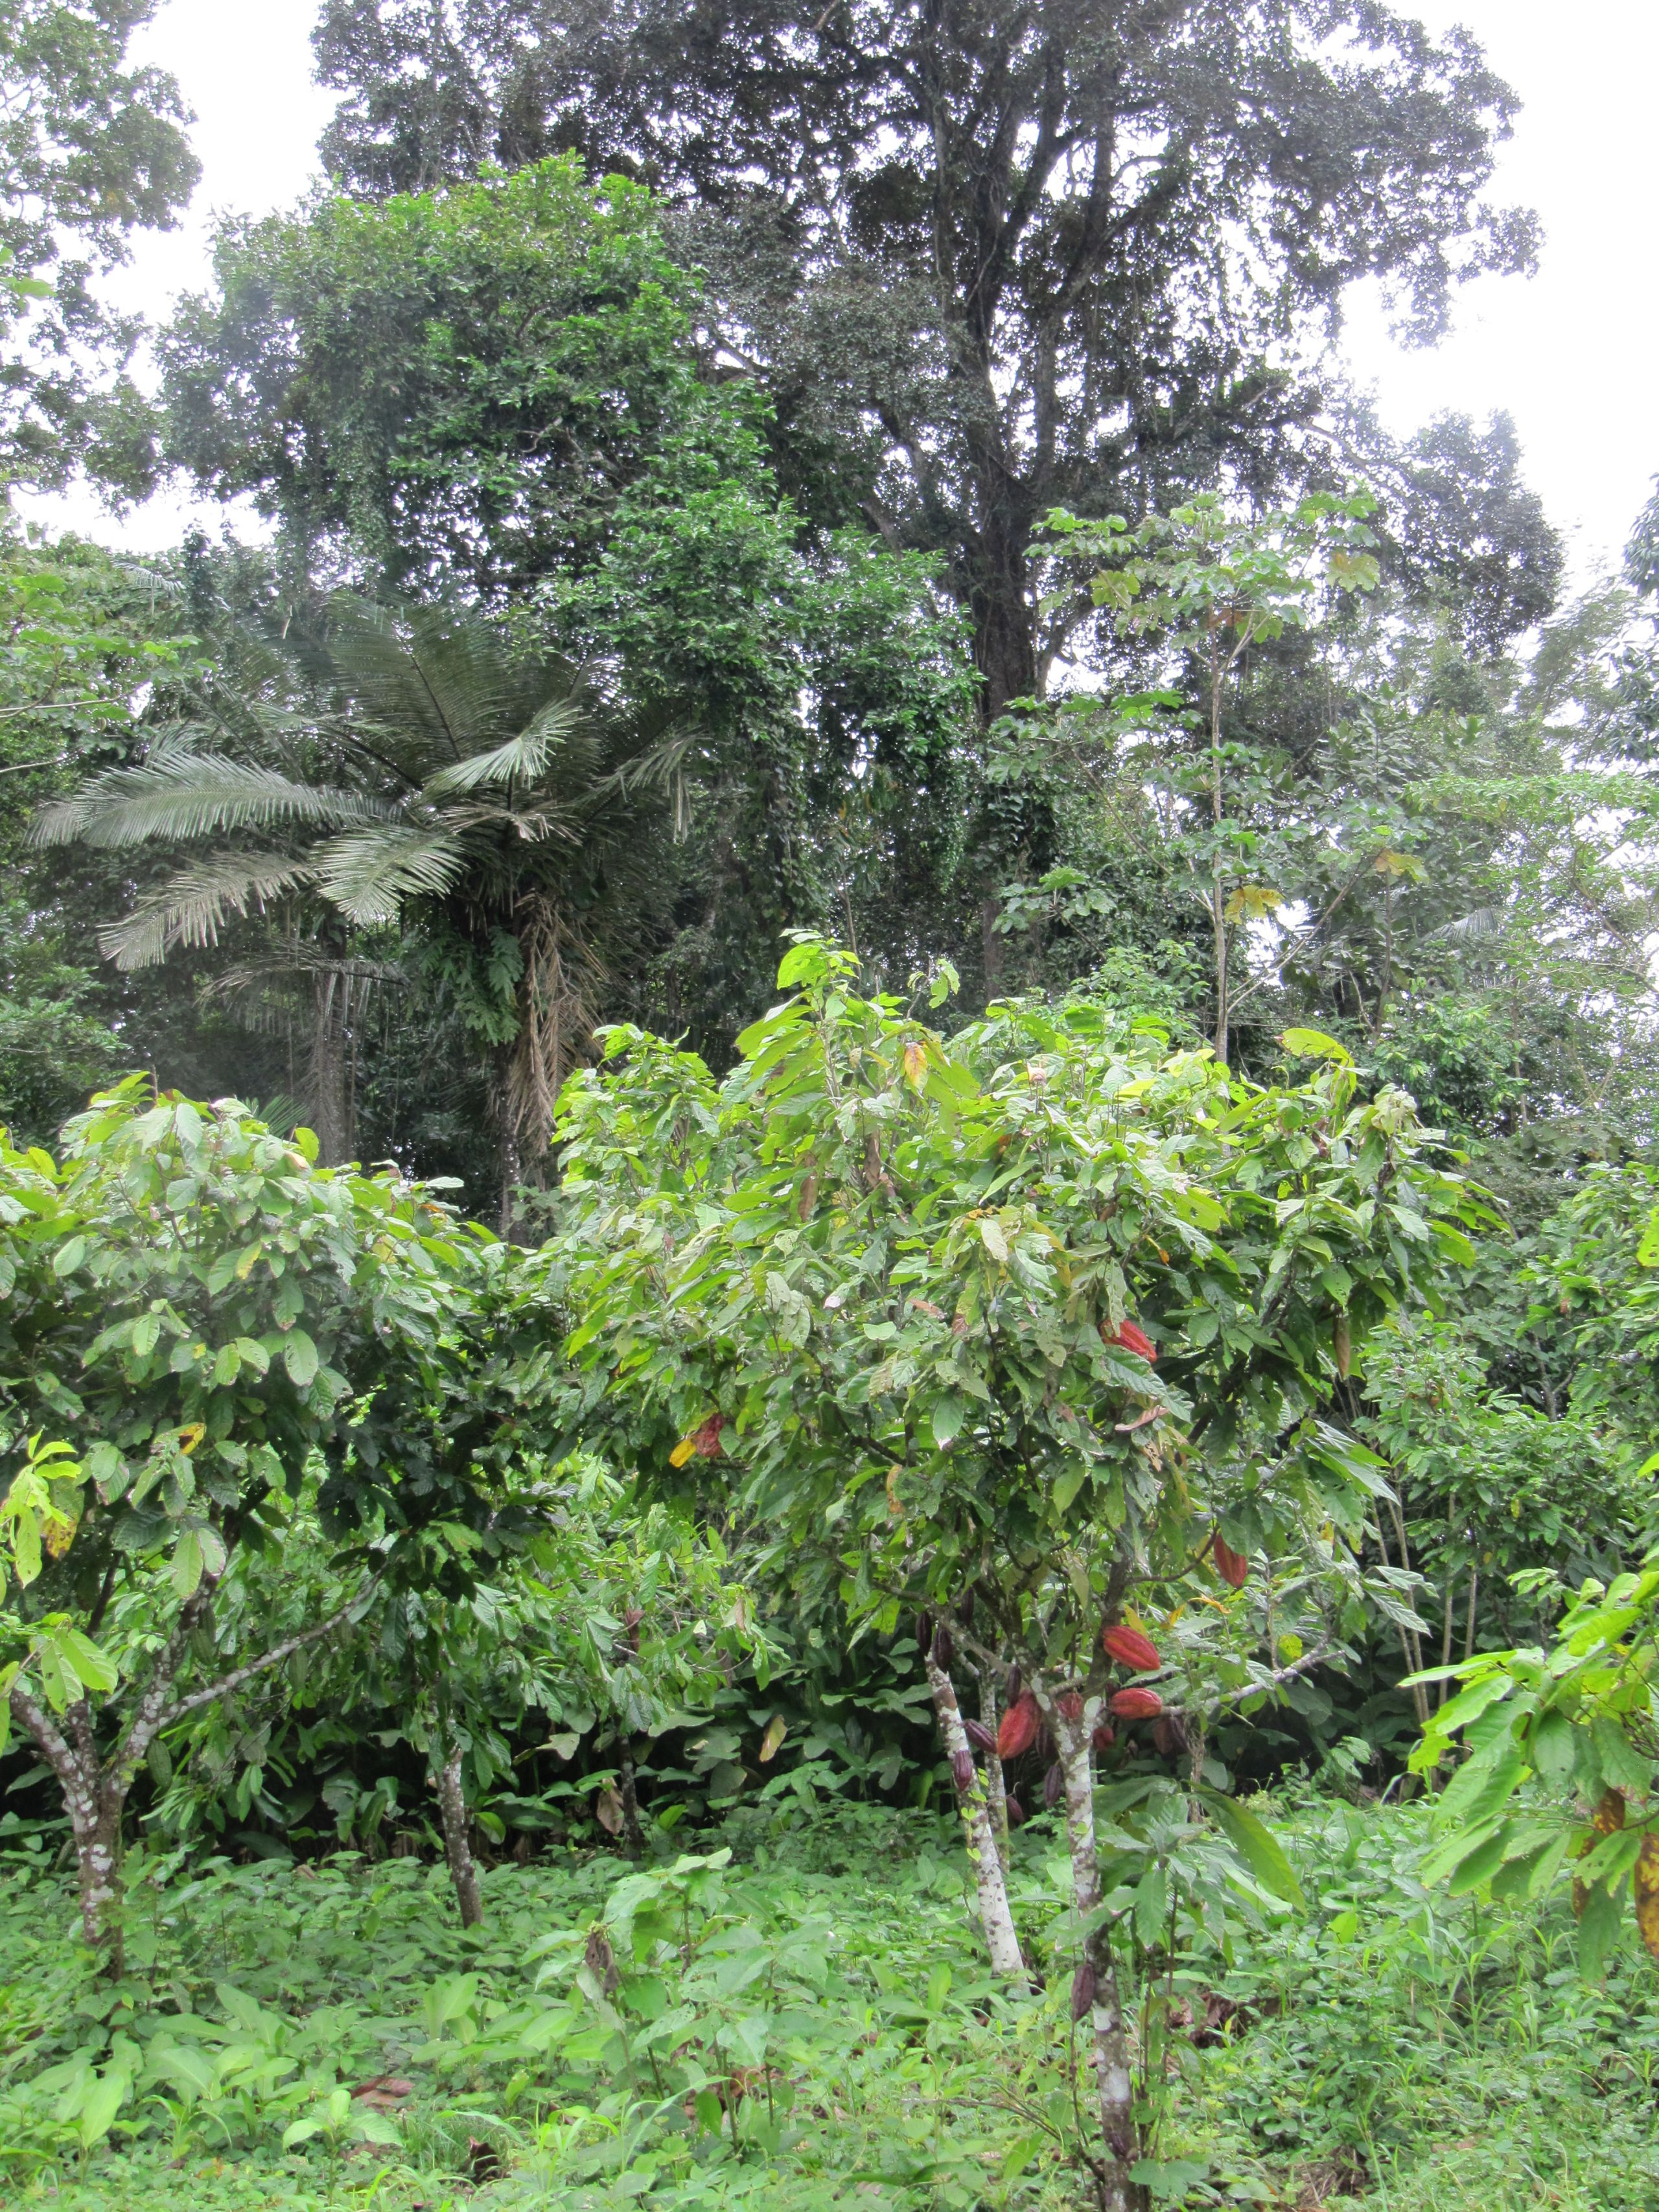 Smallholder vanilla agroforests in Madagascar with support trees for